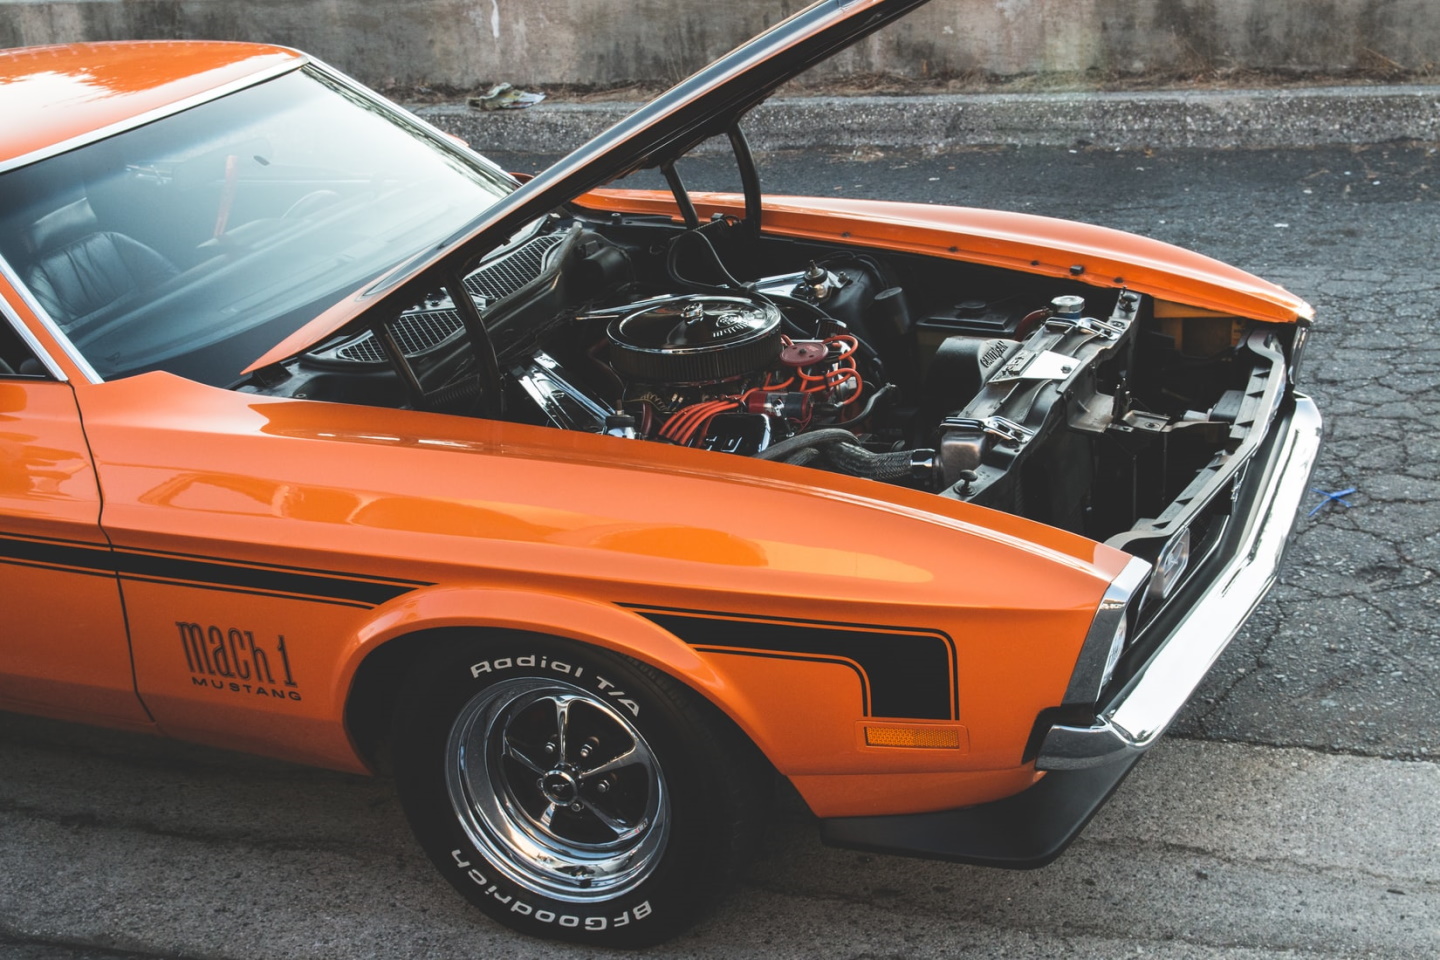 An orange mustang with the bonnet open